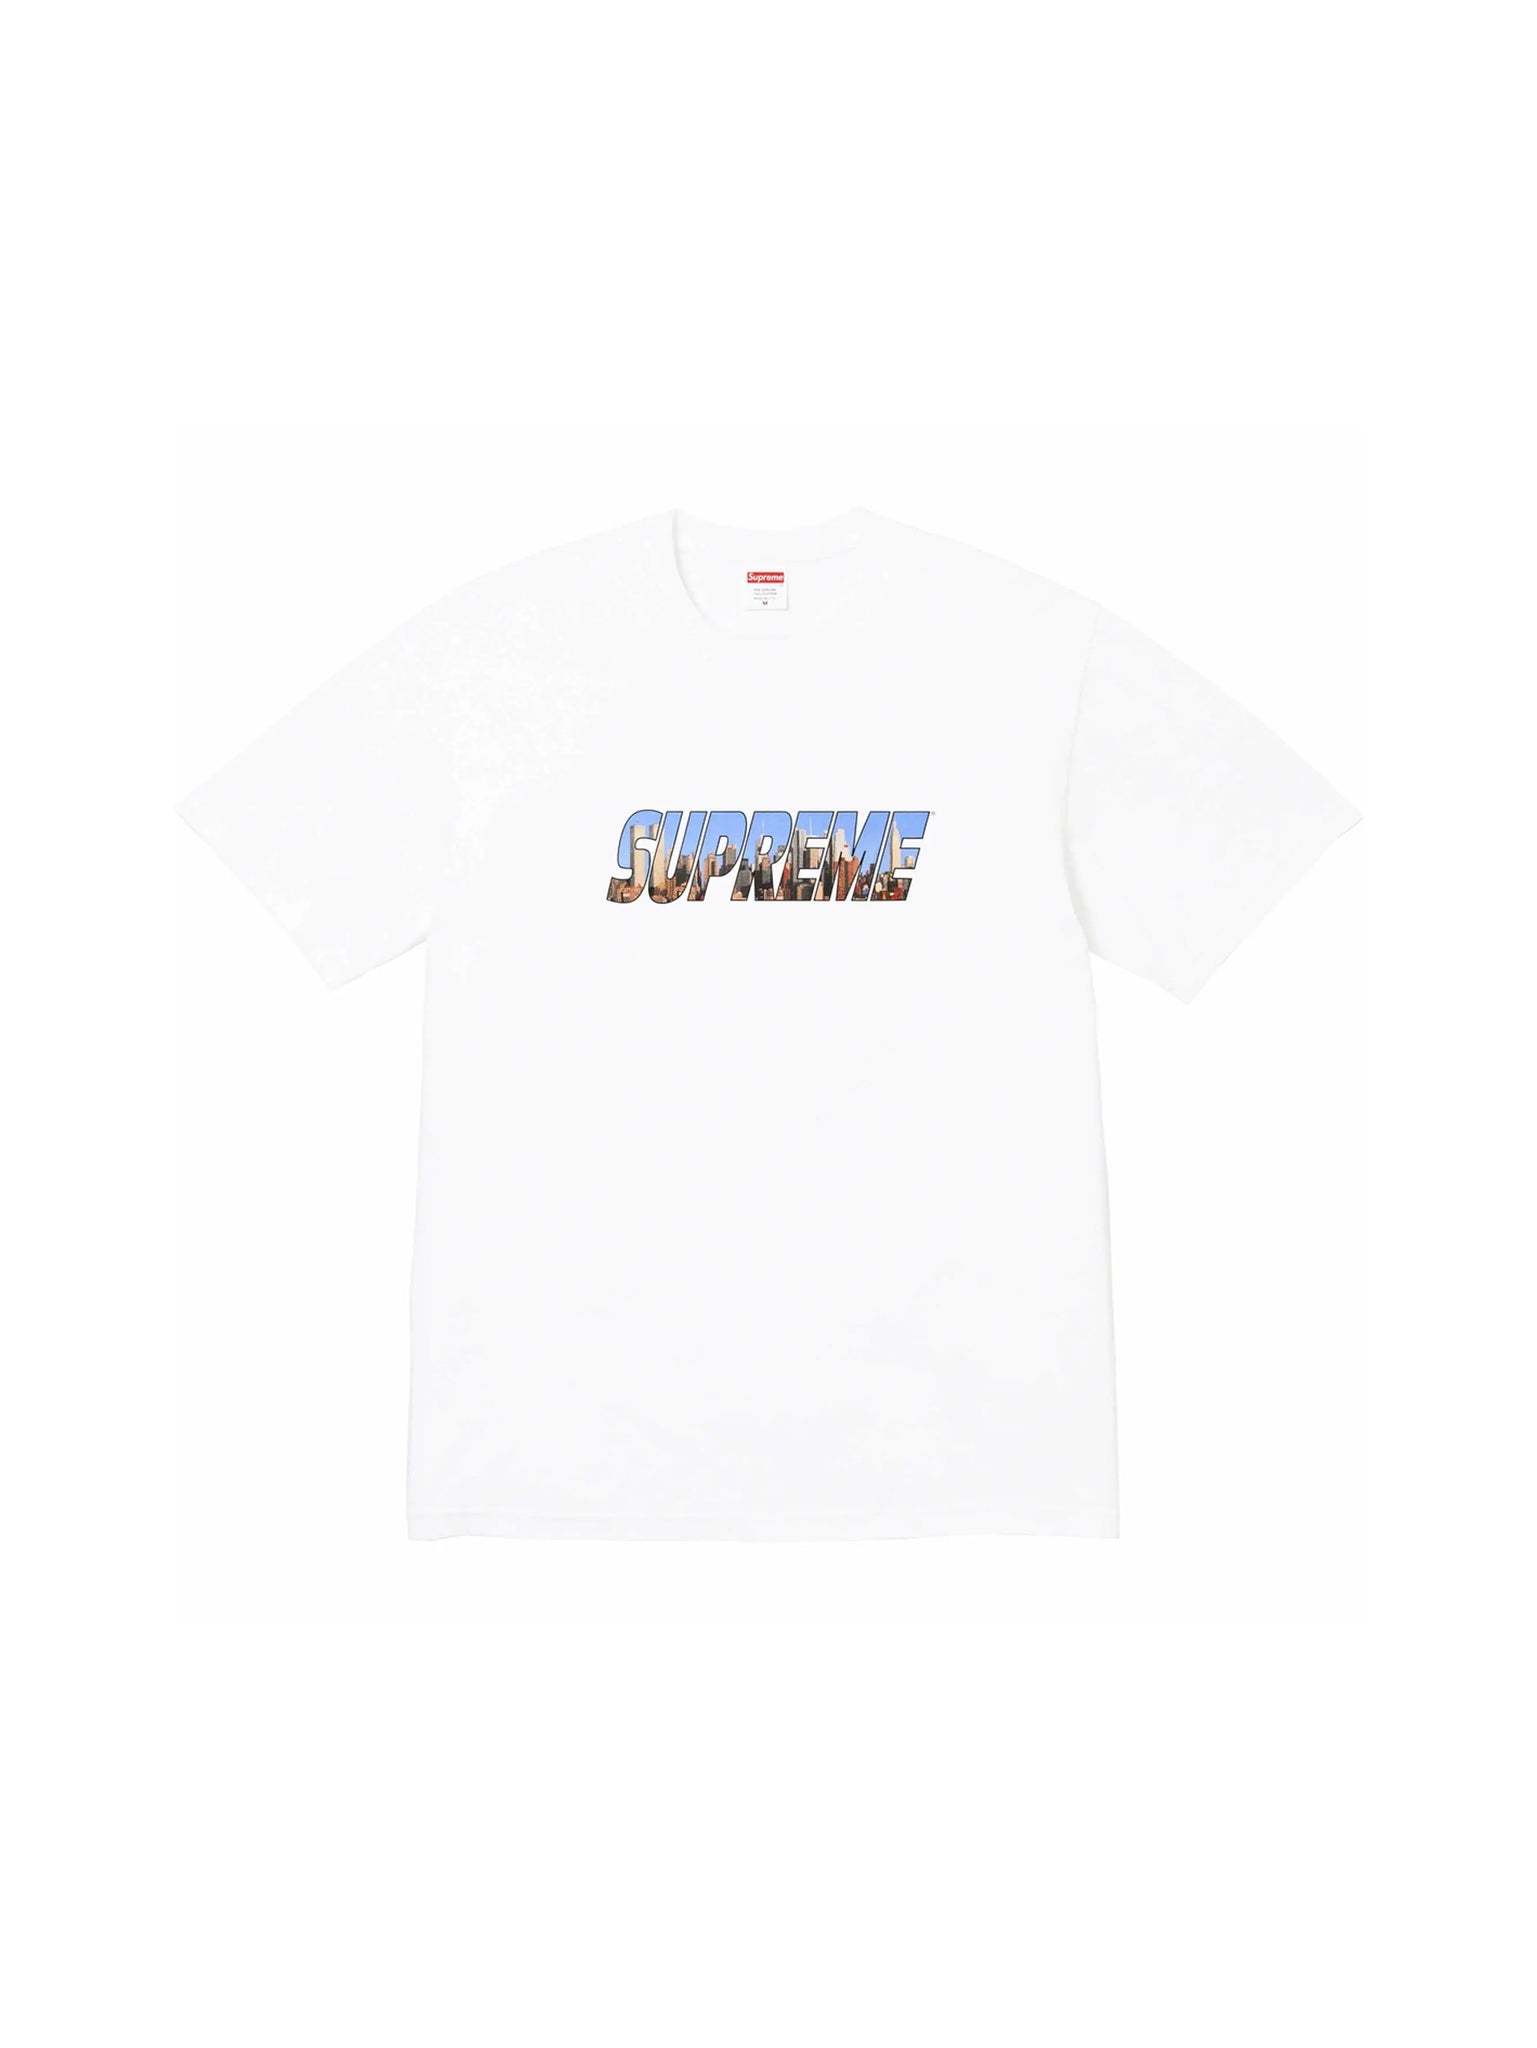 Supreme Gotham Tee White in Auckland, New Zealand - Shop name